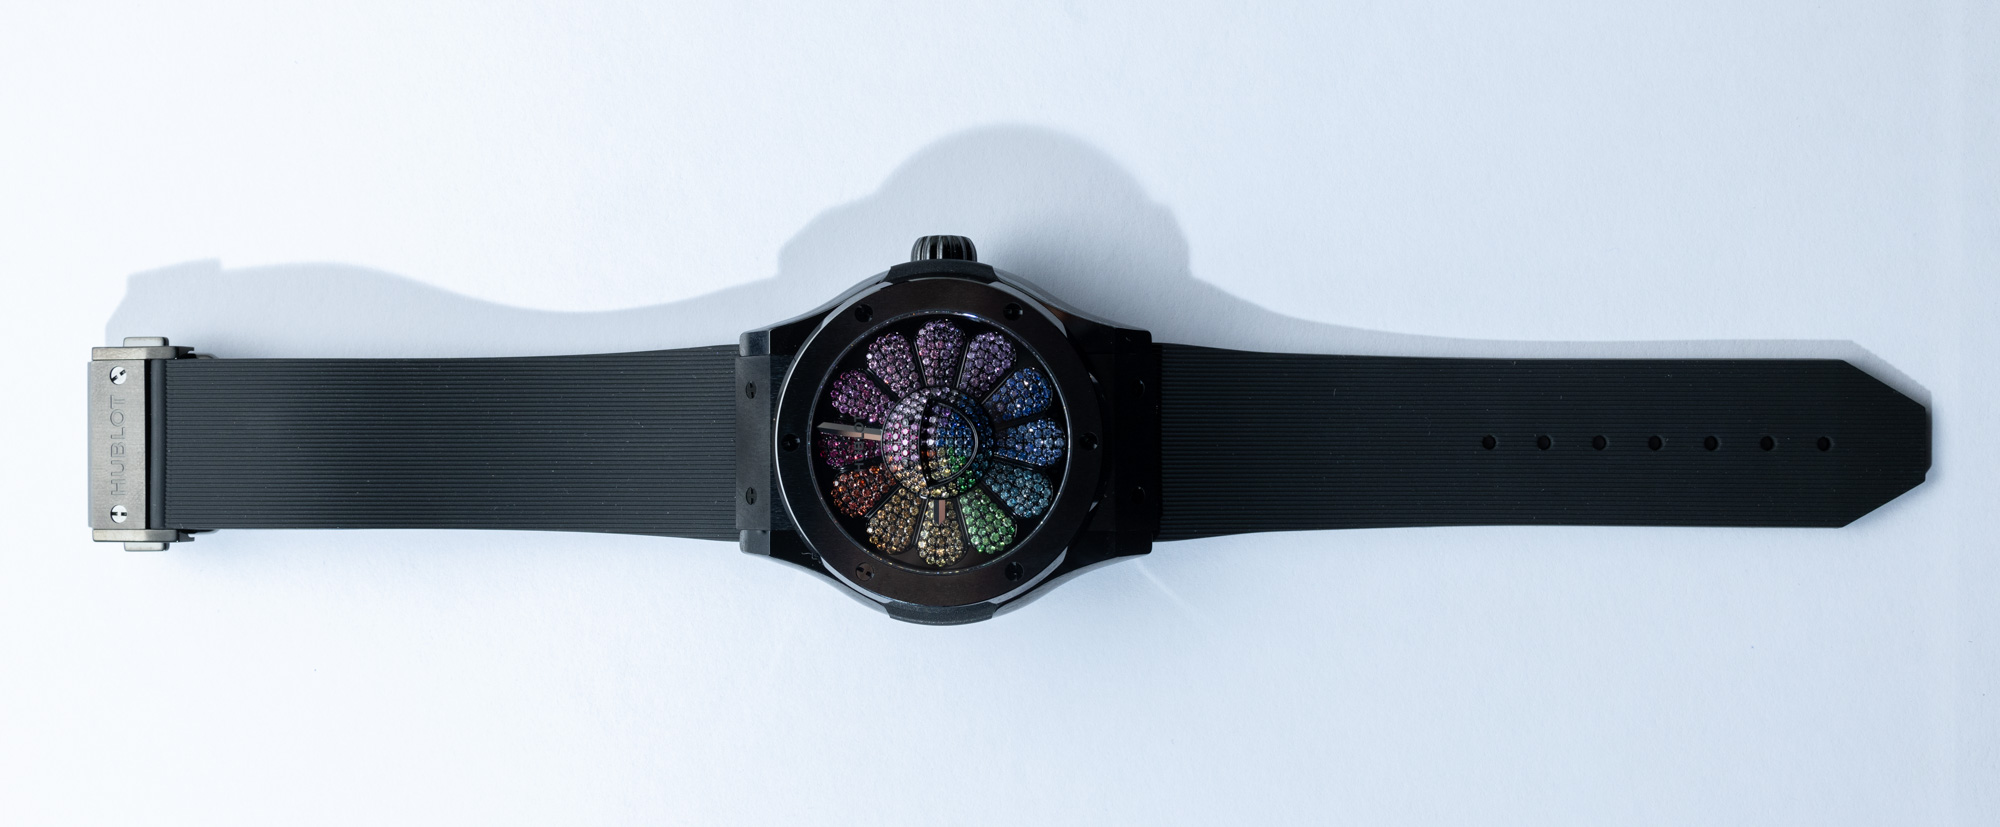 HUBLOT AND TAKASHI MURAKAMI LAUNCH A COLLECTION OF 13 UNIQUE